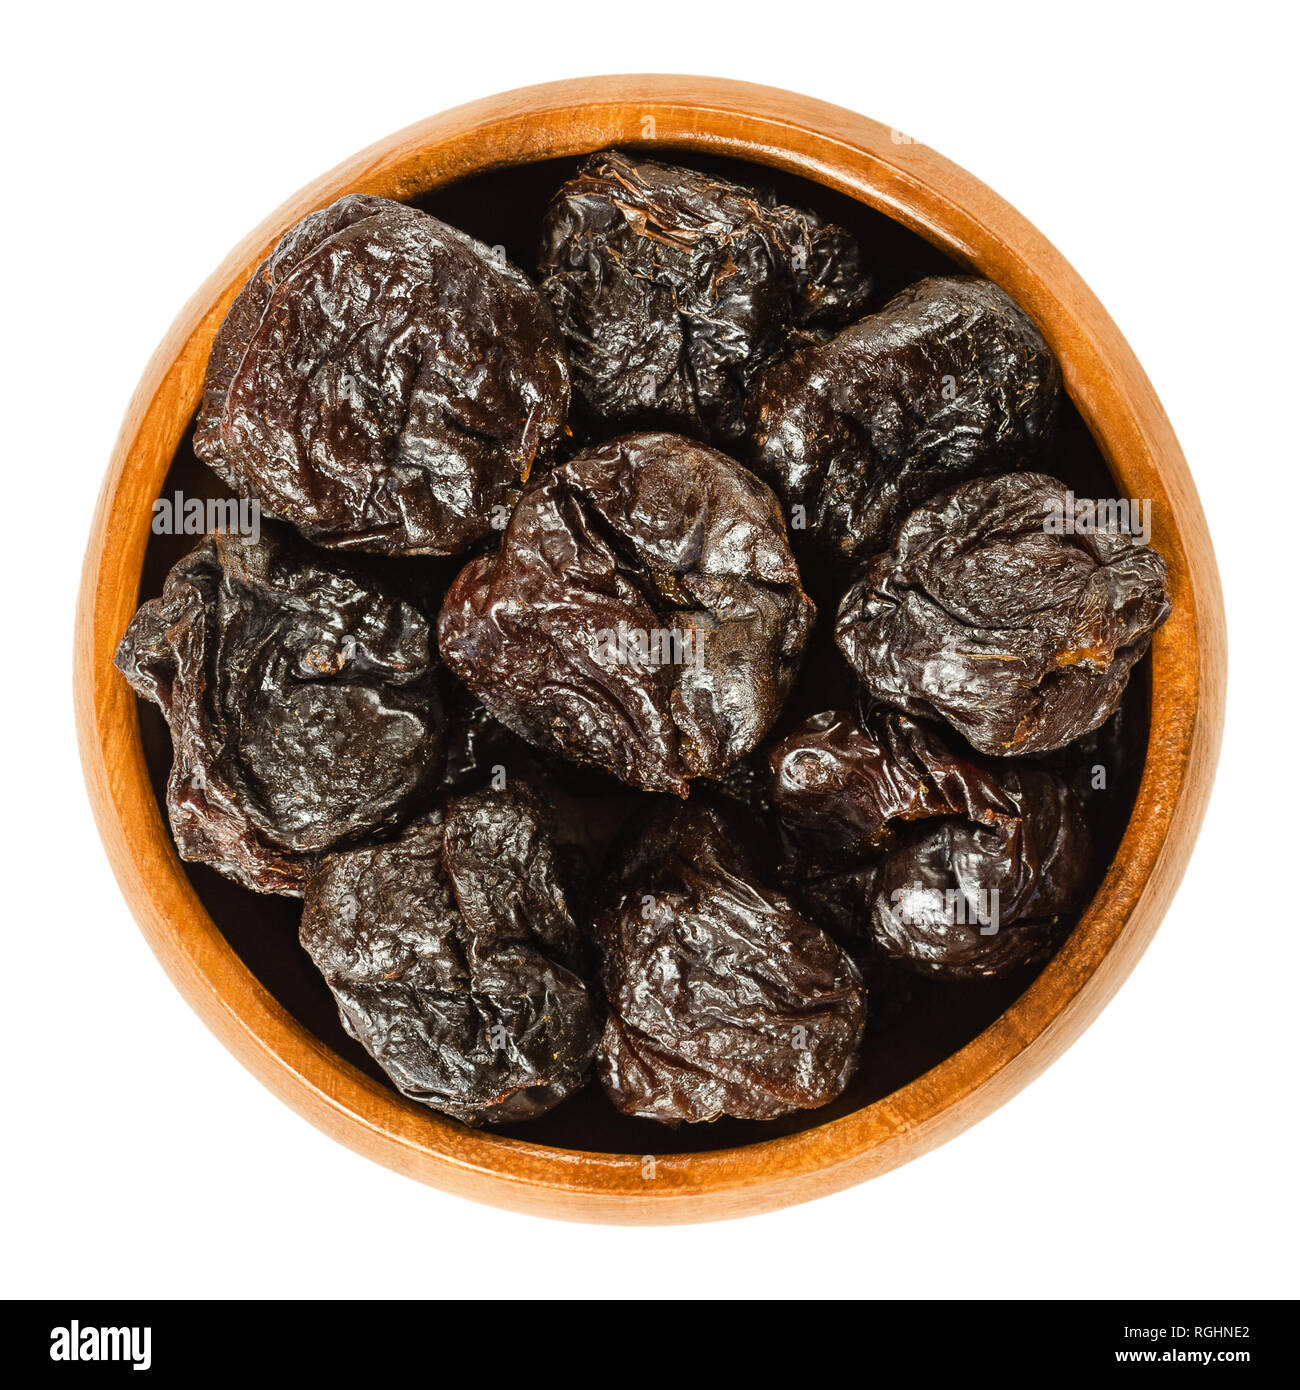 Prunes, dried plums in wooden bowl. Uncooked, dehydrated, pitted fruits of Prunus domestica with black color, used as snack. Isolated macro photo. Stock Photo